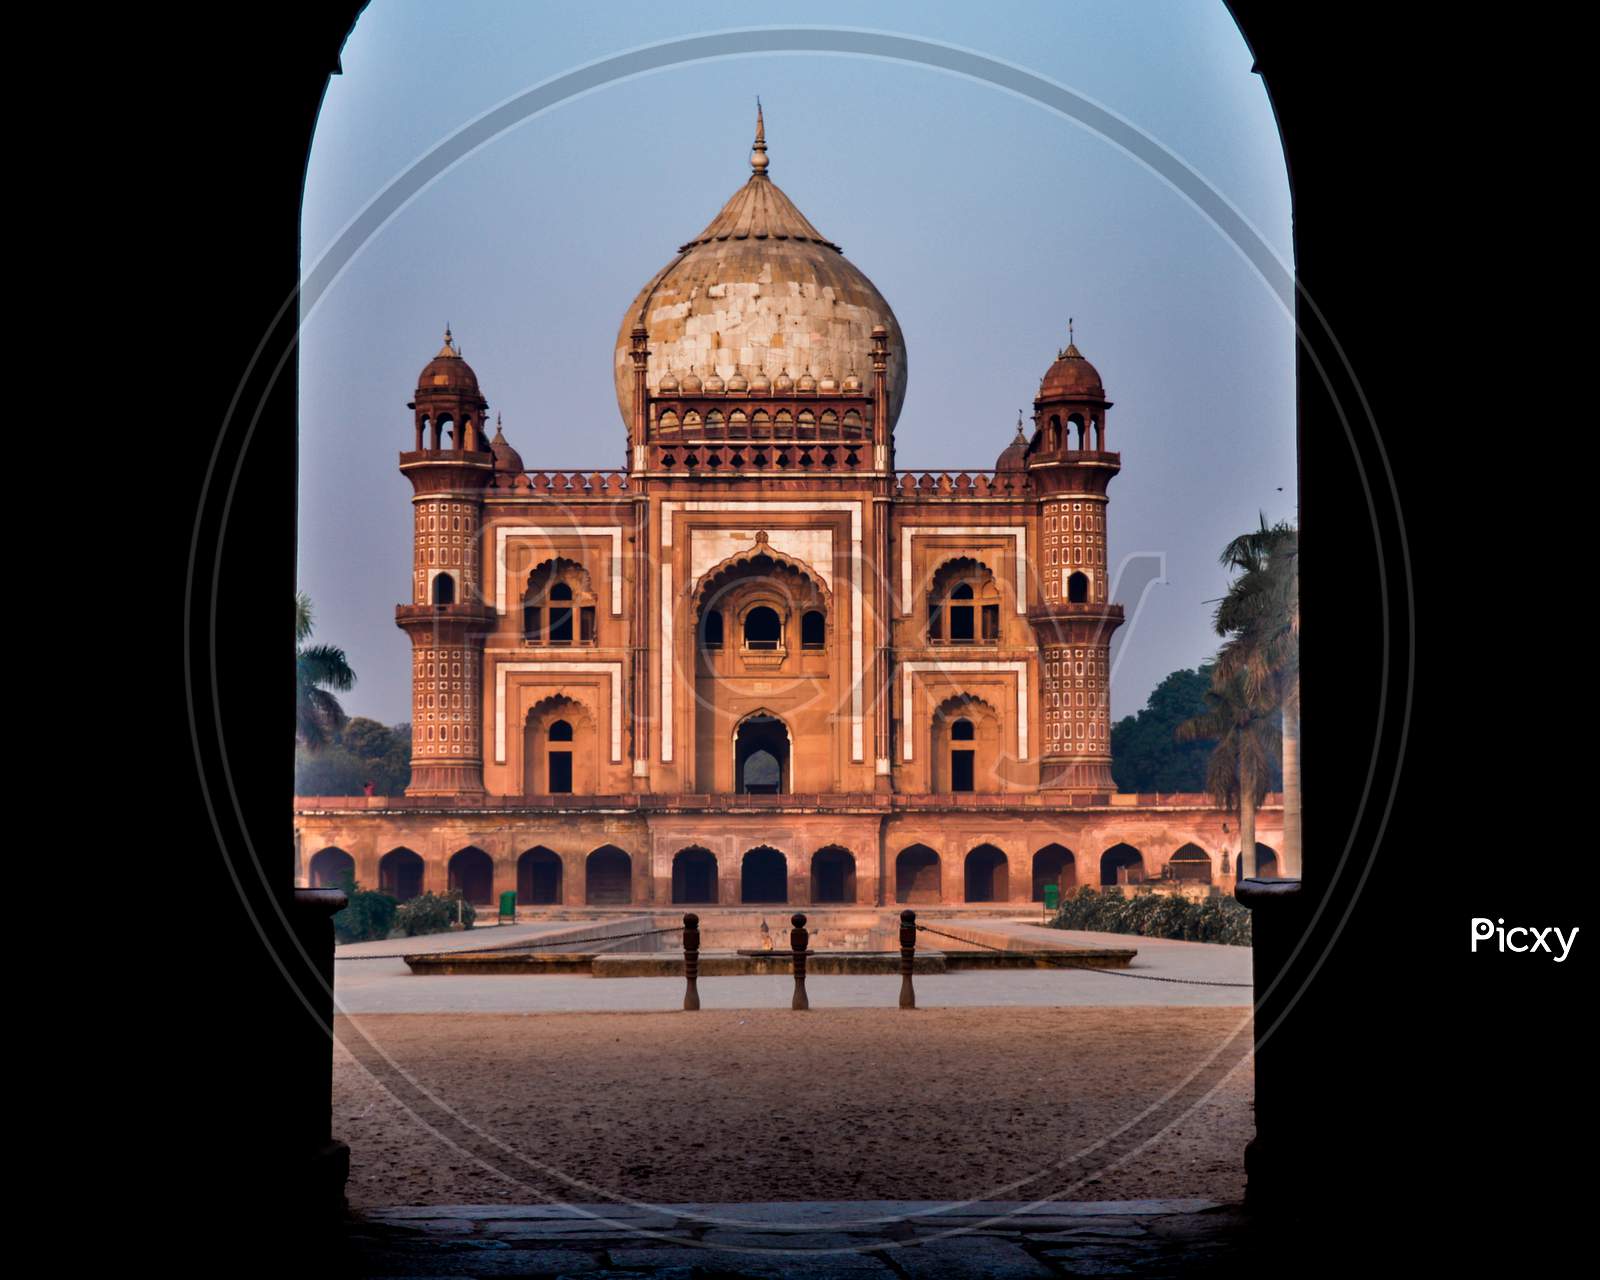 A Mesmerizing View Of Safdarjung Tomb Memorial From The Main Gate,Entrance At Winter Morning.